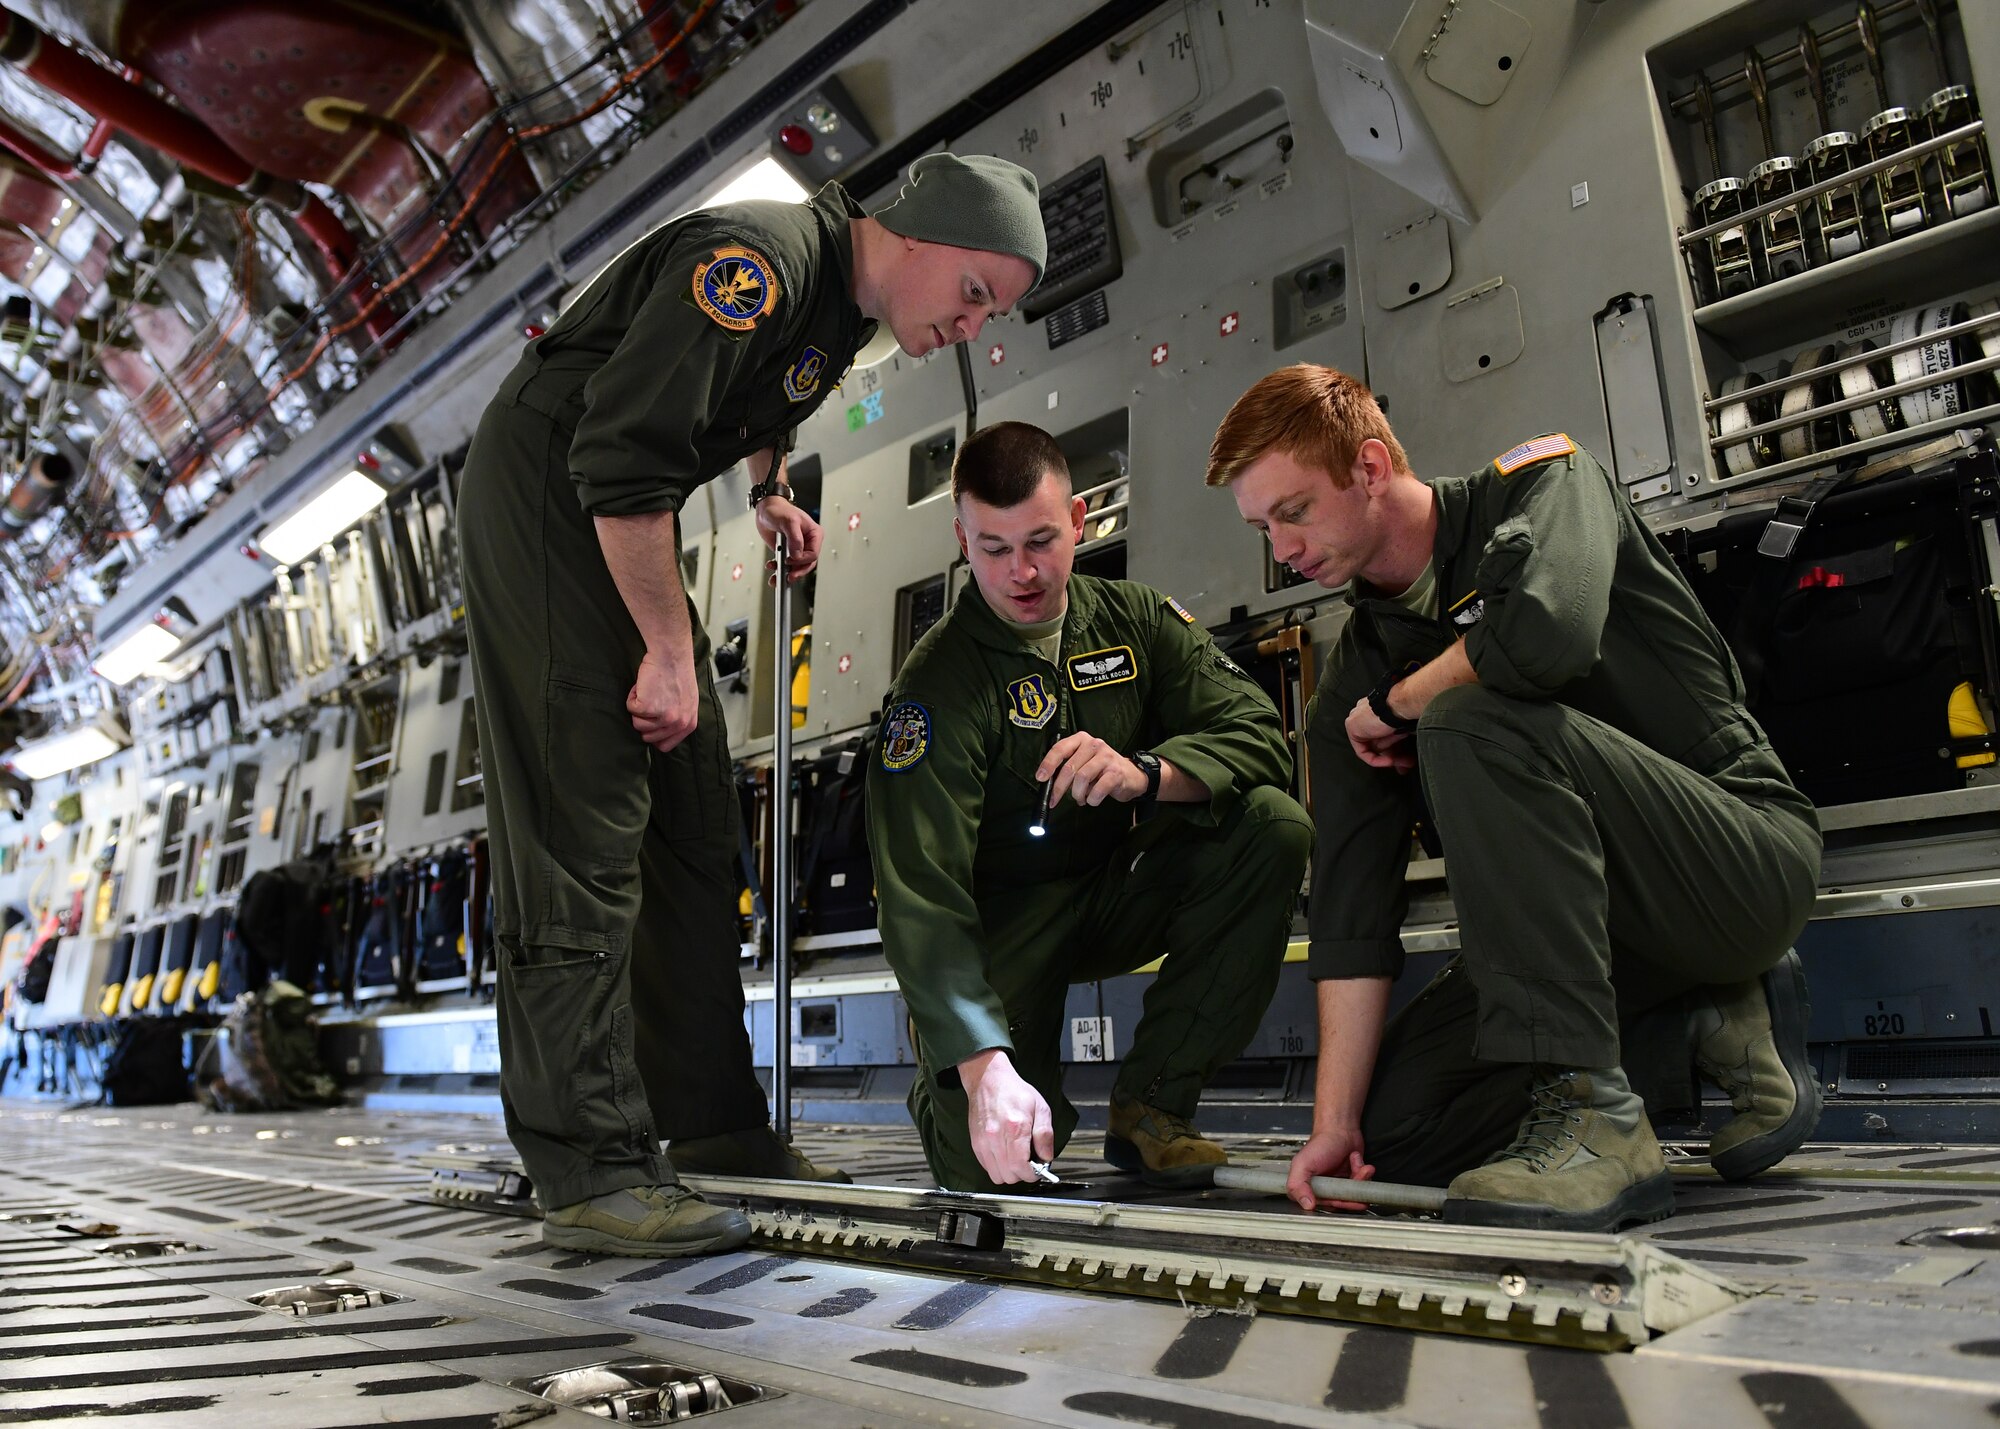 Tech. Sgt. Paul Maginnis and Staff Sgt. Carl Kocon, loadmasters with the 758th Airlift Squadron, instruct Senior Airman Steve Strobel, loadmaster with the 758th AS, standard job procedures at the Pittsburgh International Airport Air Reserve Station, Pennsylvania, April 11, 2019. Strobel came back from loadmaster technical school in January and was completing his on the job training.(U.S. Air Force Photo by Senior Airman Grace Thomson)